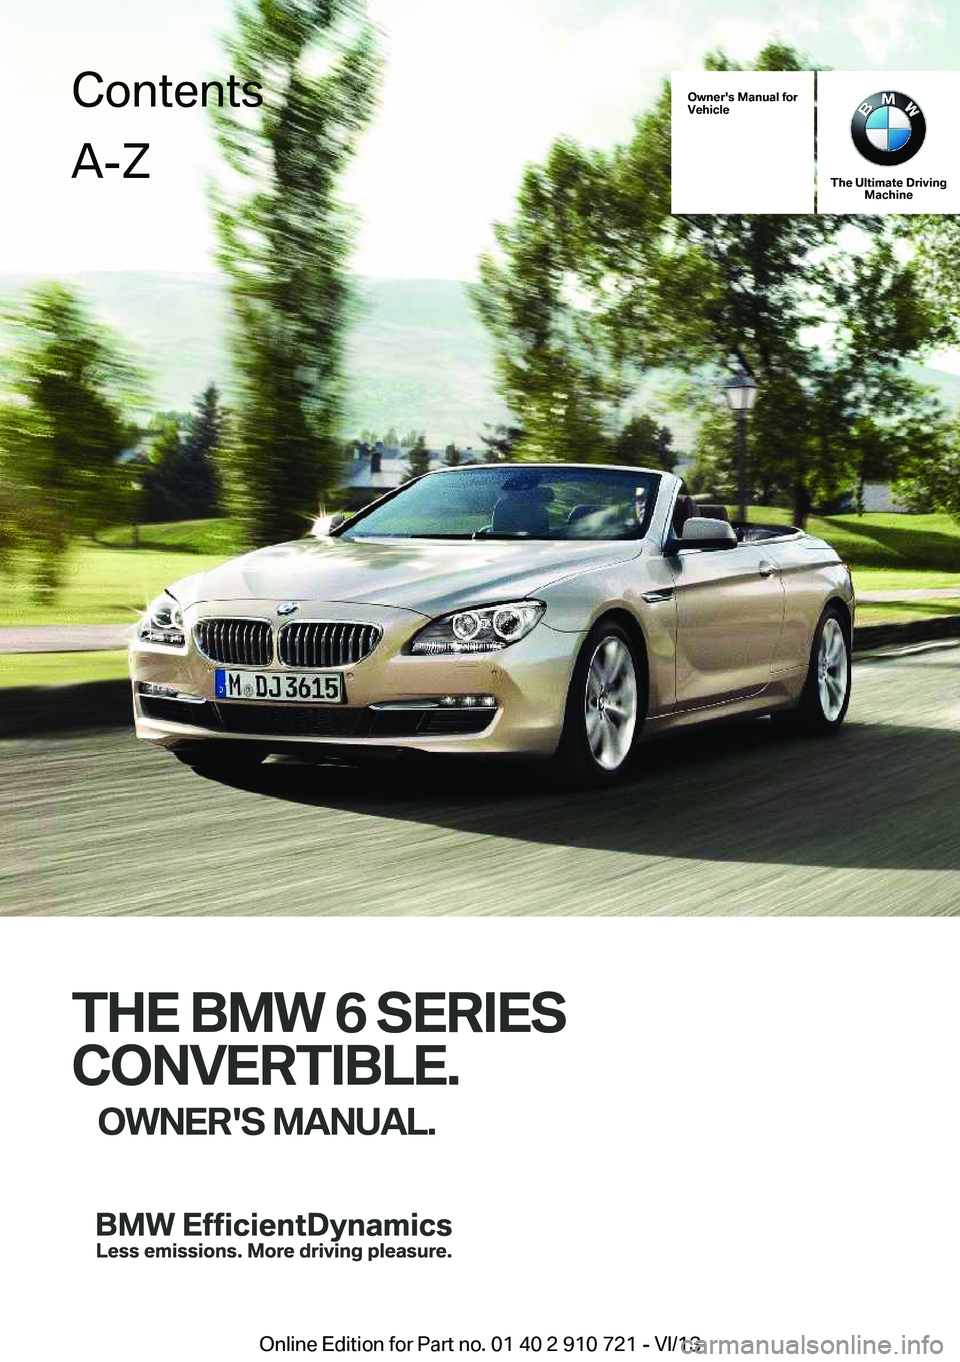 BMW 650I XDRIVE CONVERTIBLE 2014  Owners Manual Owner's Manual forVehicle
The Ultimate DrivingMachine
THE BMW 6 SERIES
CONVERTIBLE.
OWNER'S MANUAL.
ContentsA-Z
Online Edition for Part no. 01 40 2 910 721 - VI/13   